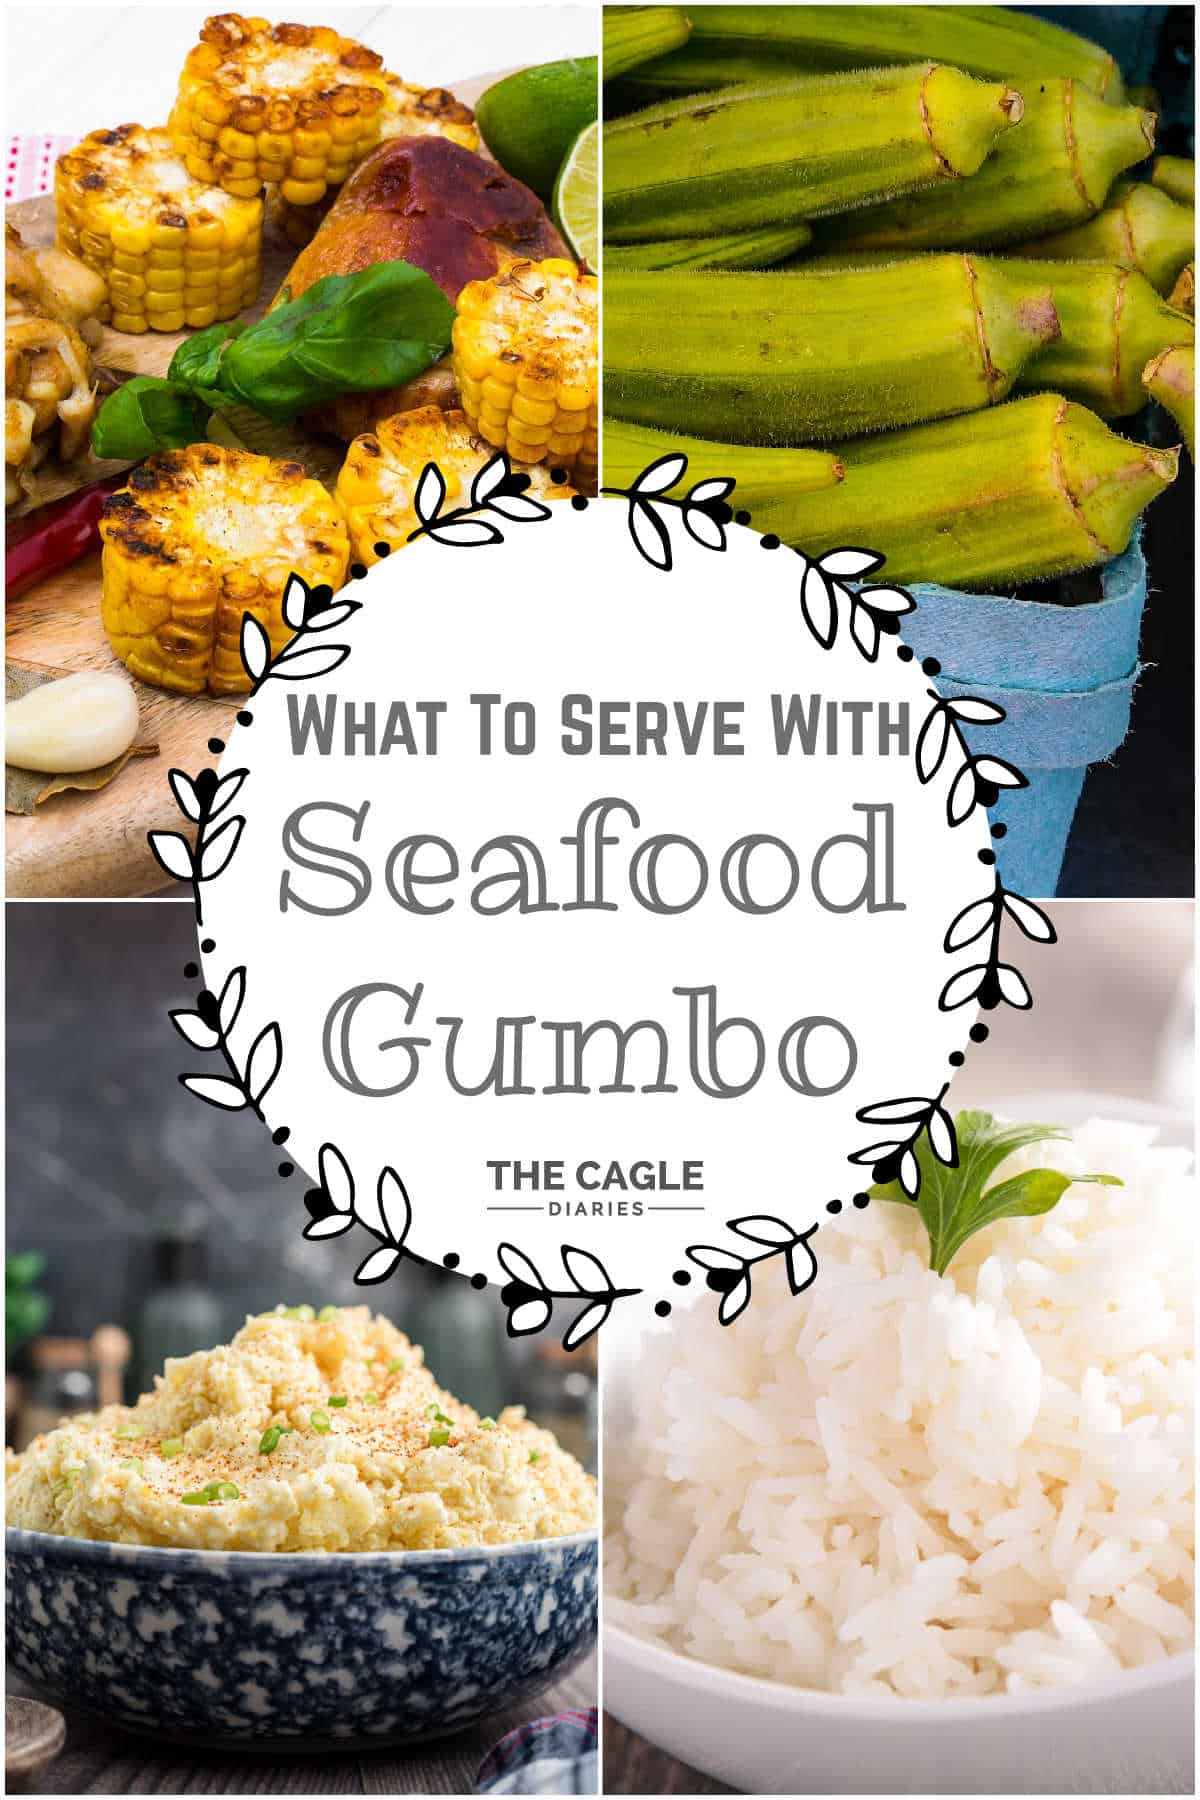 A collage of four images with a bowl of rice, potato salad, okra and grilled corn - showing what should be served with seafood gumbo.